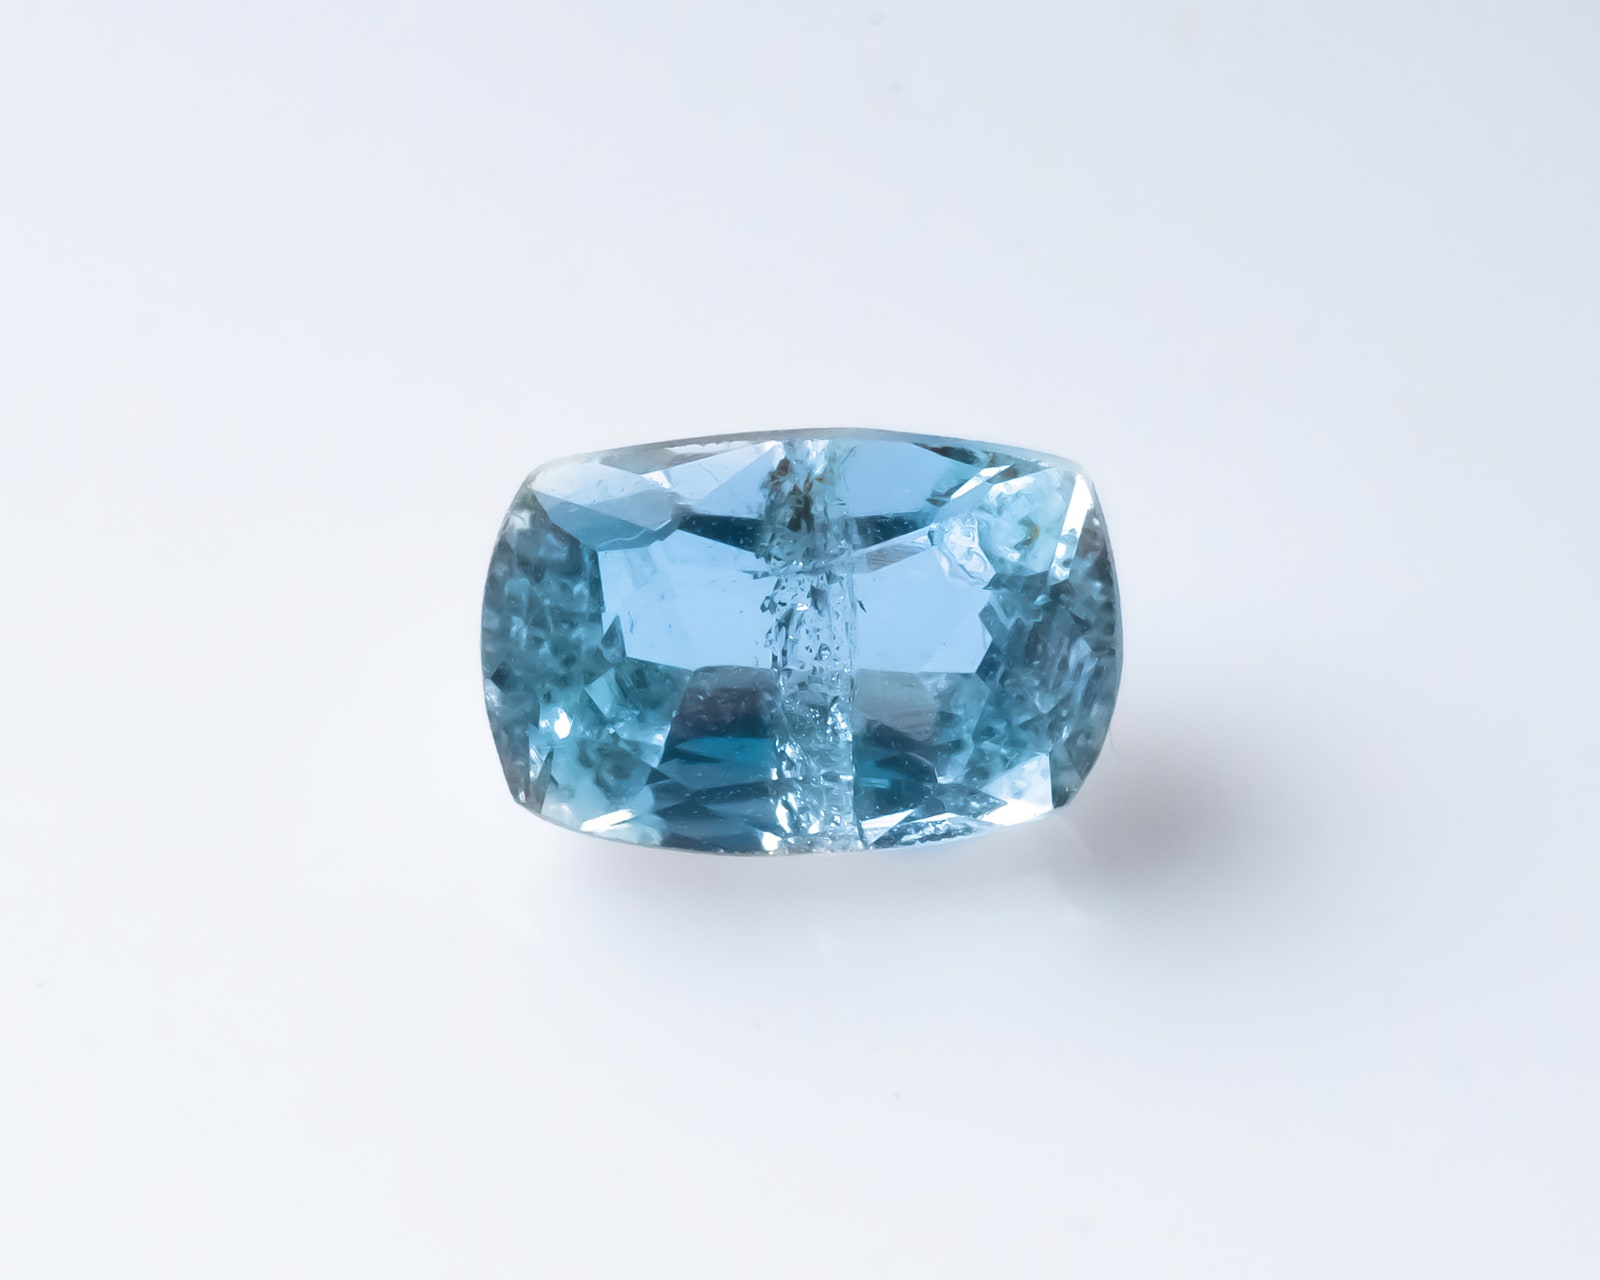 Natural faceted blue aquamarine on the white background